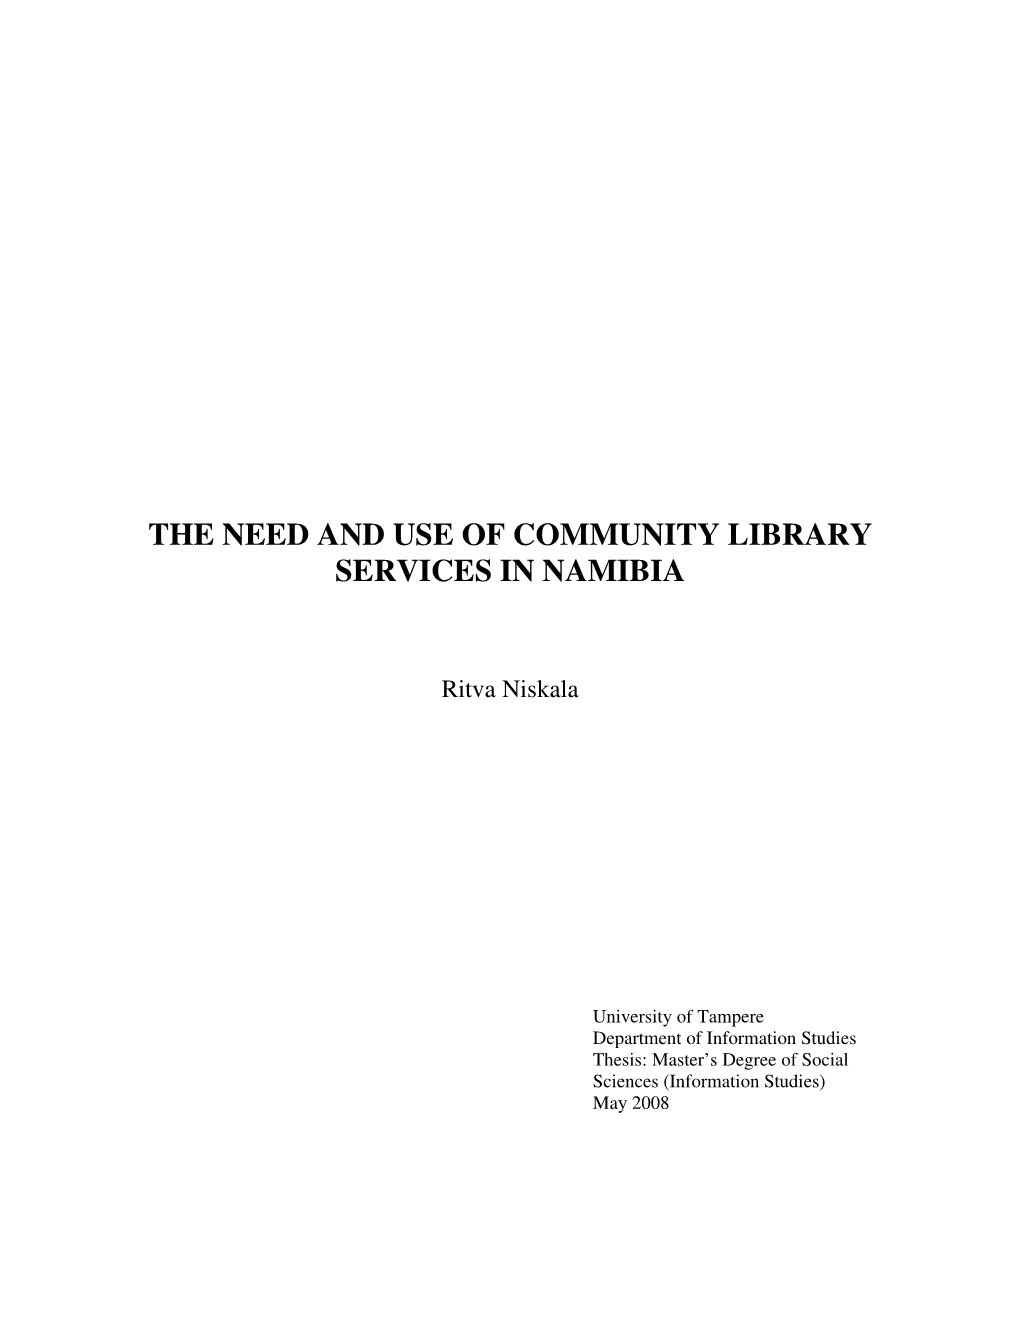 The Need and Use of Community Library Services in Namibia